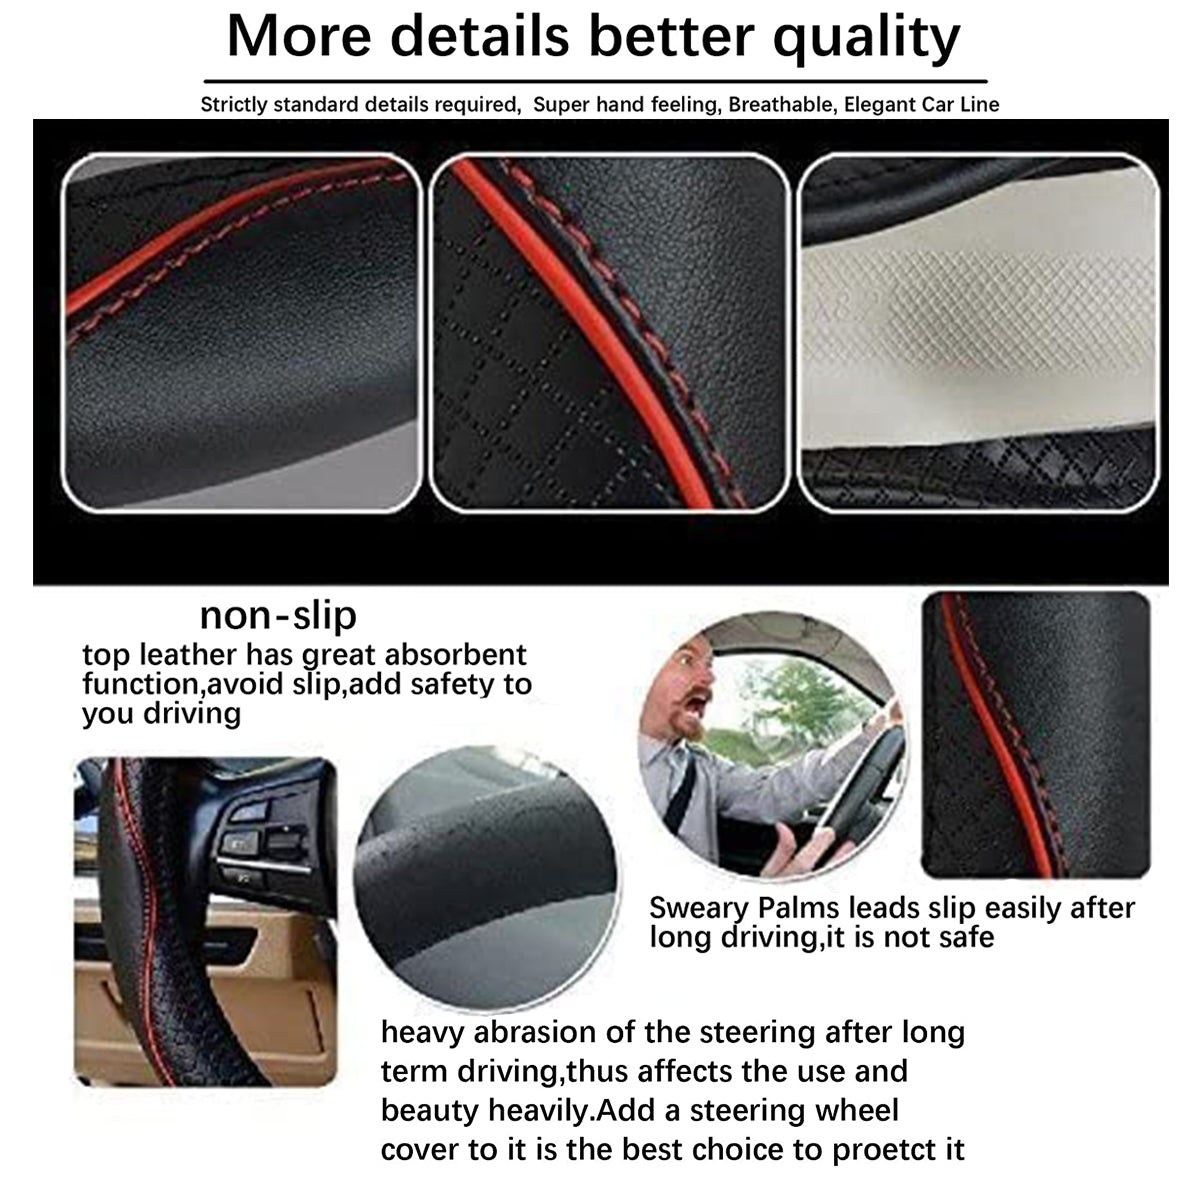 Car Steering Wheel Cover, Custom For Your Cars, Anti-Slip, Safety, Soft, Breathable, Heavy Duty, Thick, Full Surround, Sports Style, Car Accessories KO18990